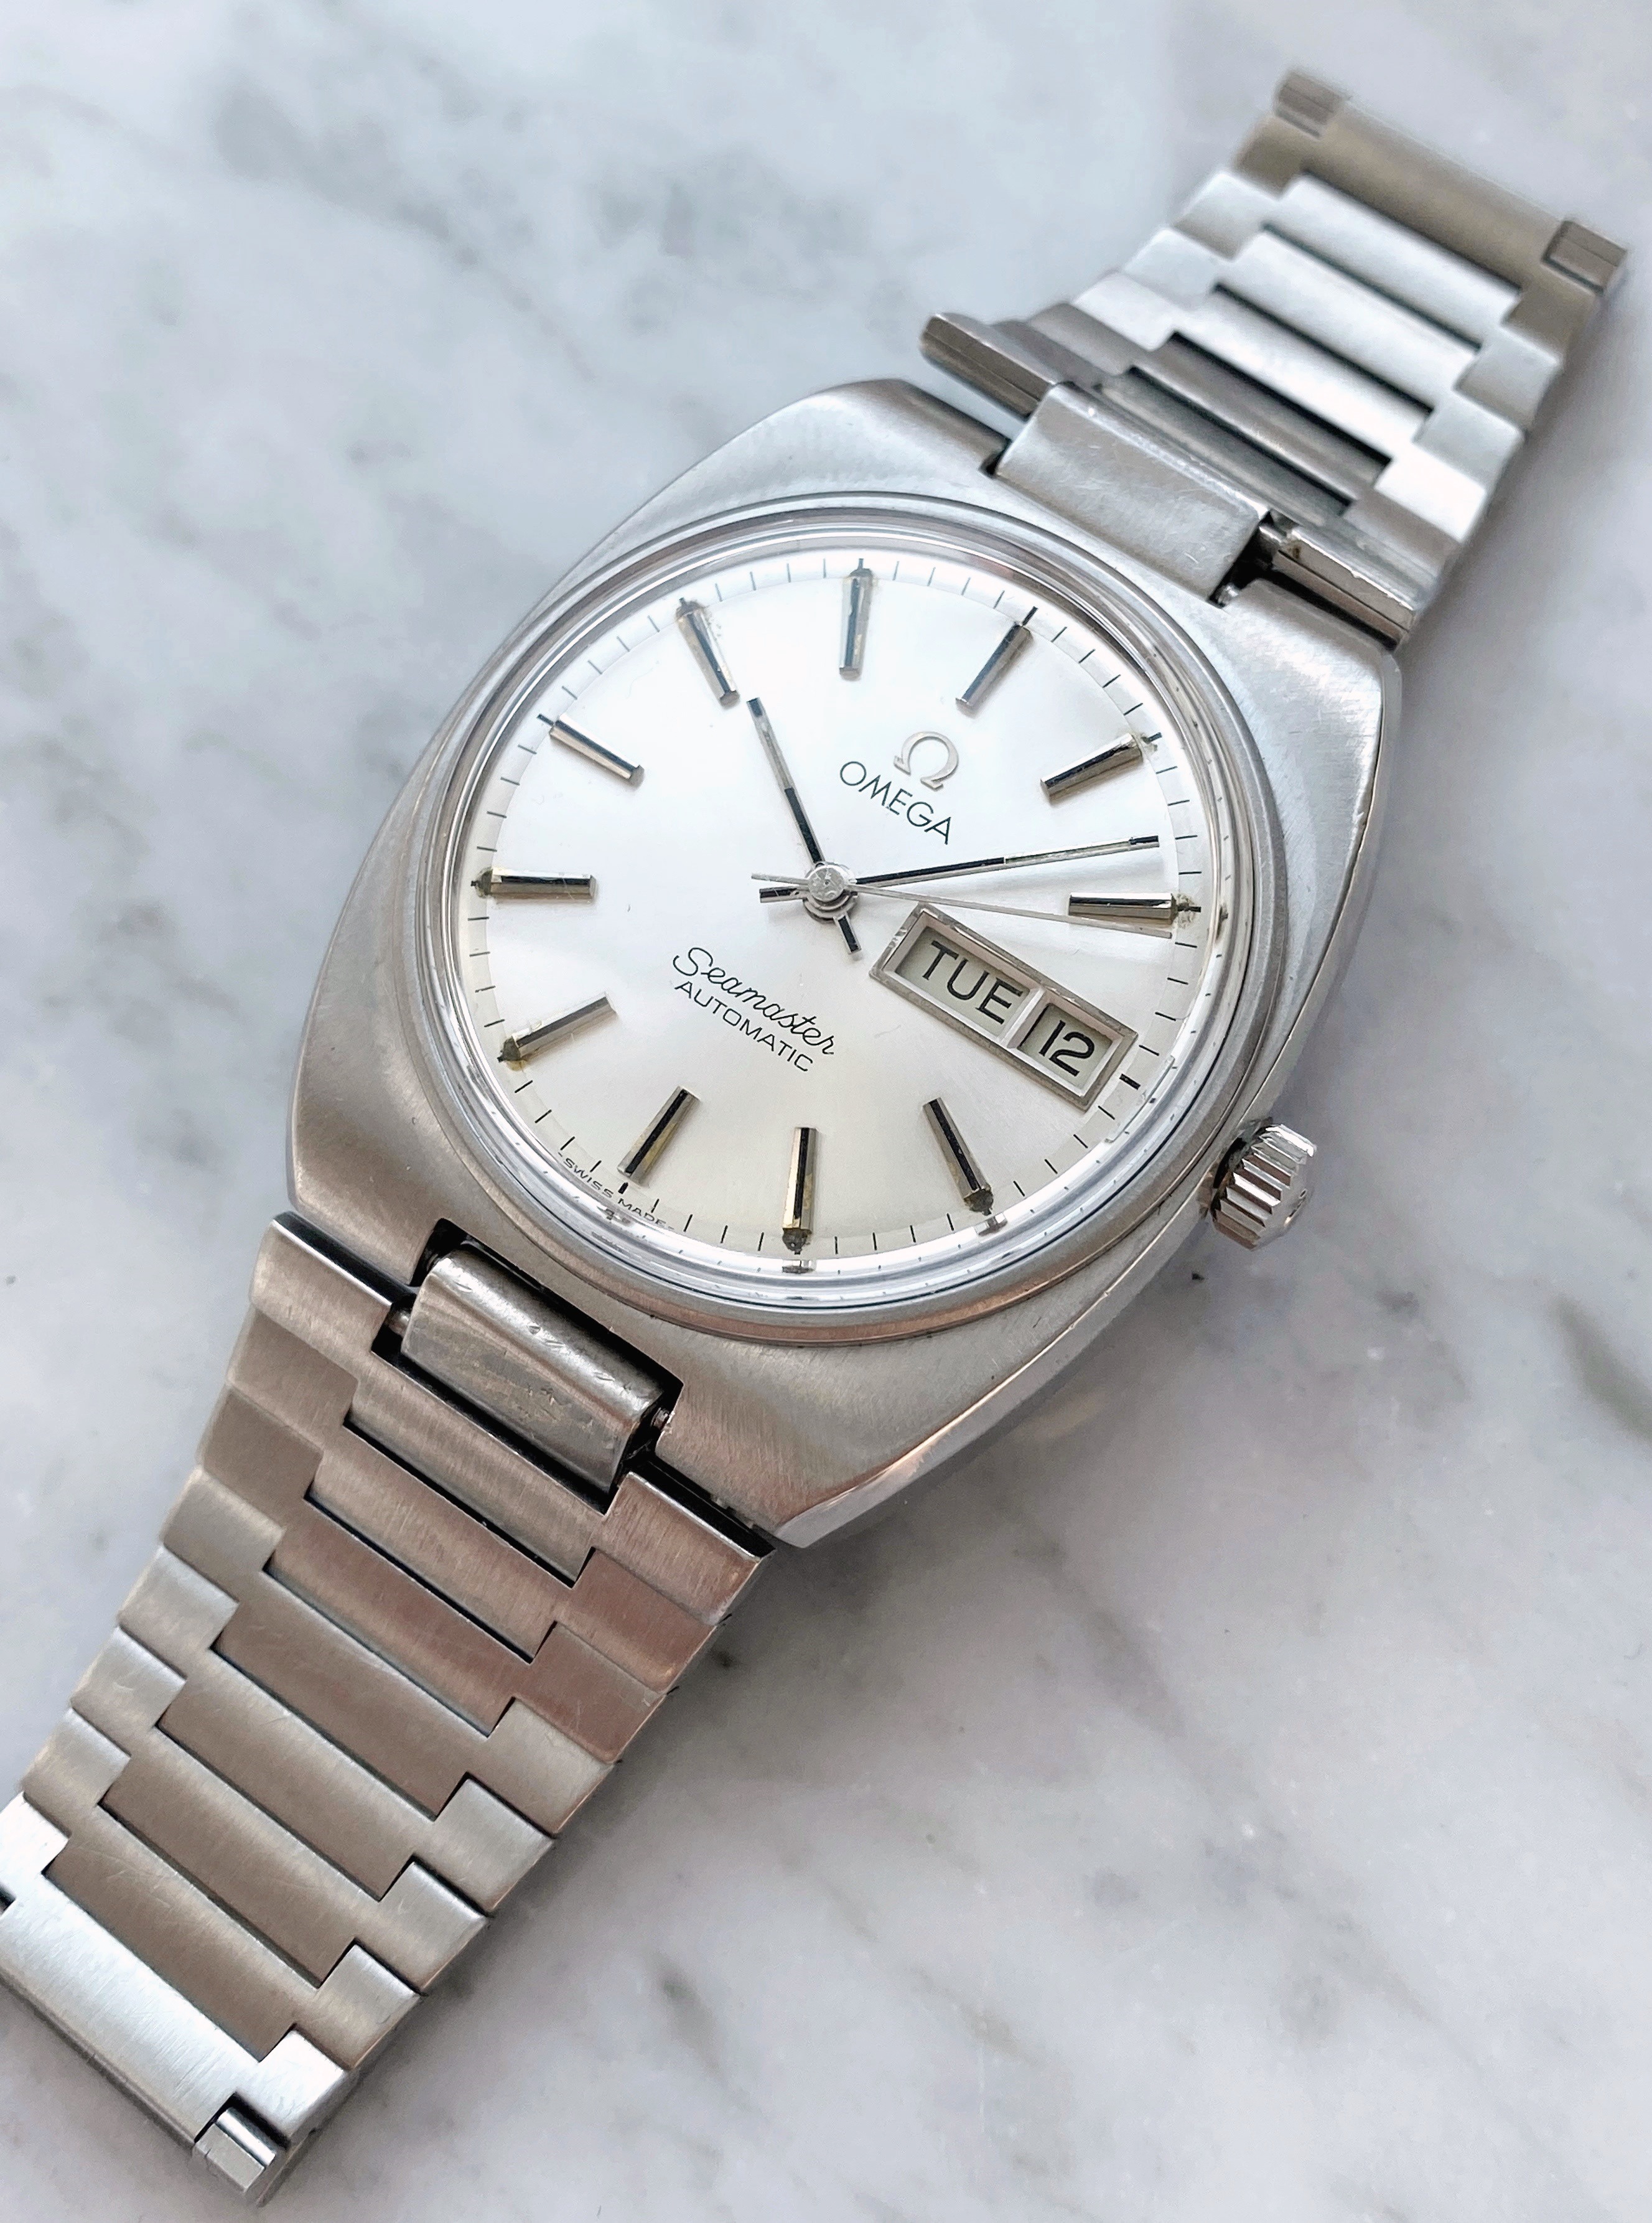 omega seamaster cal 1020 day date